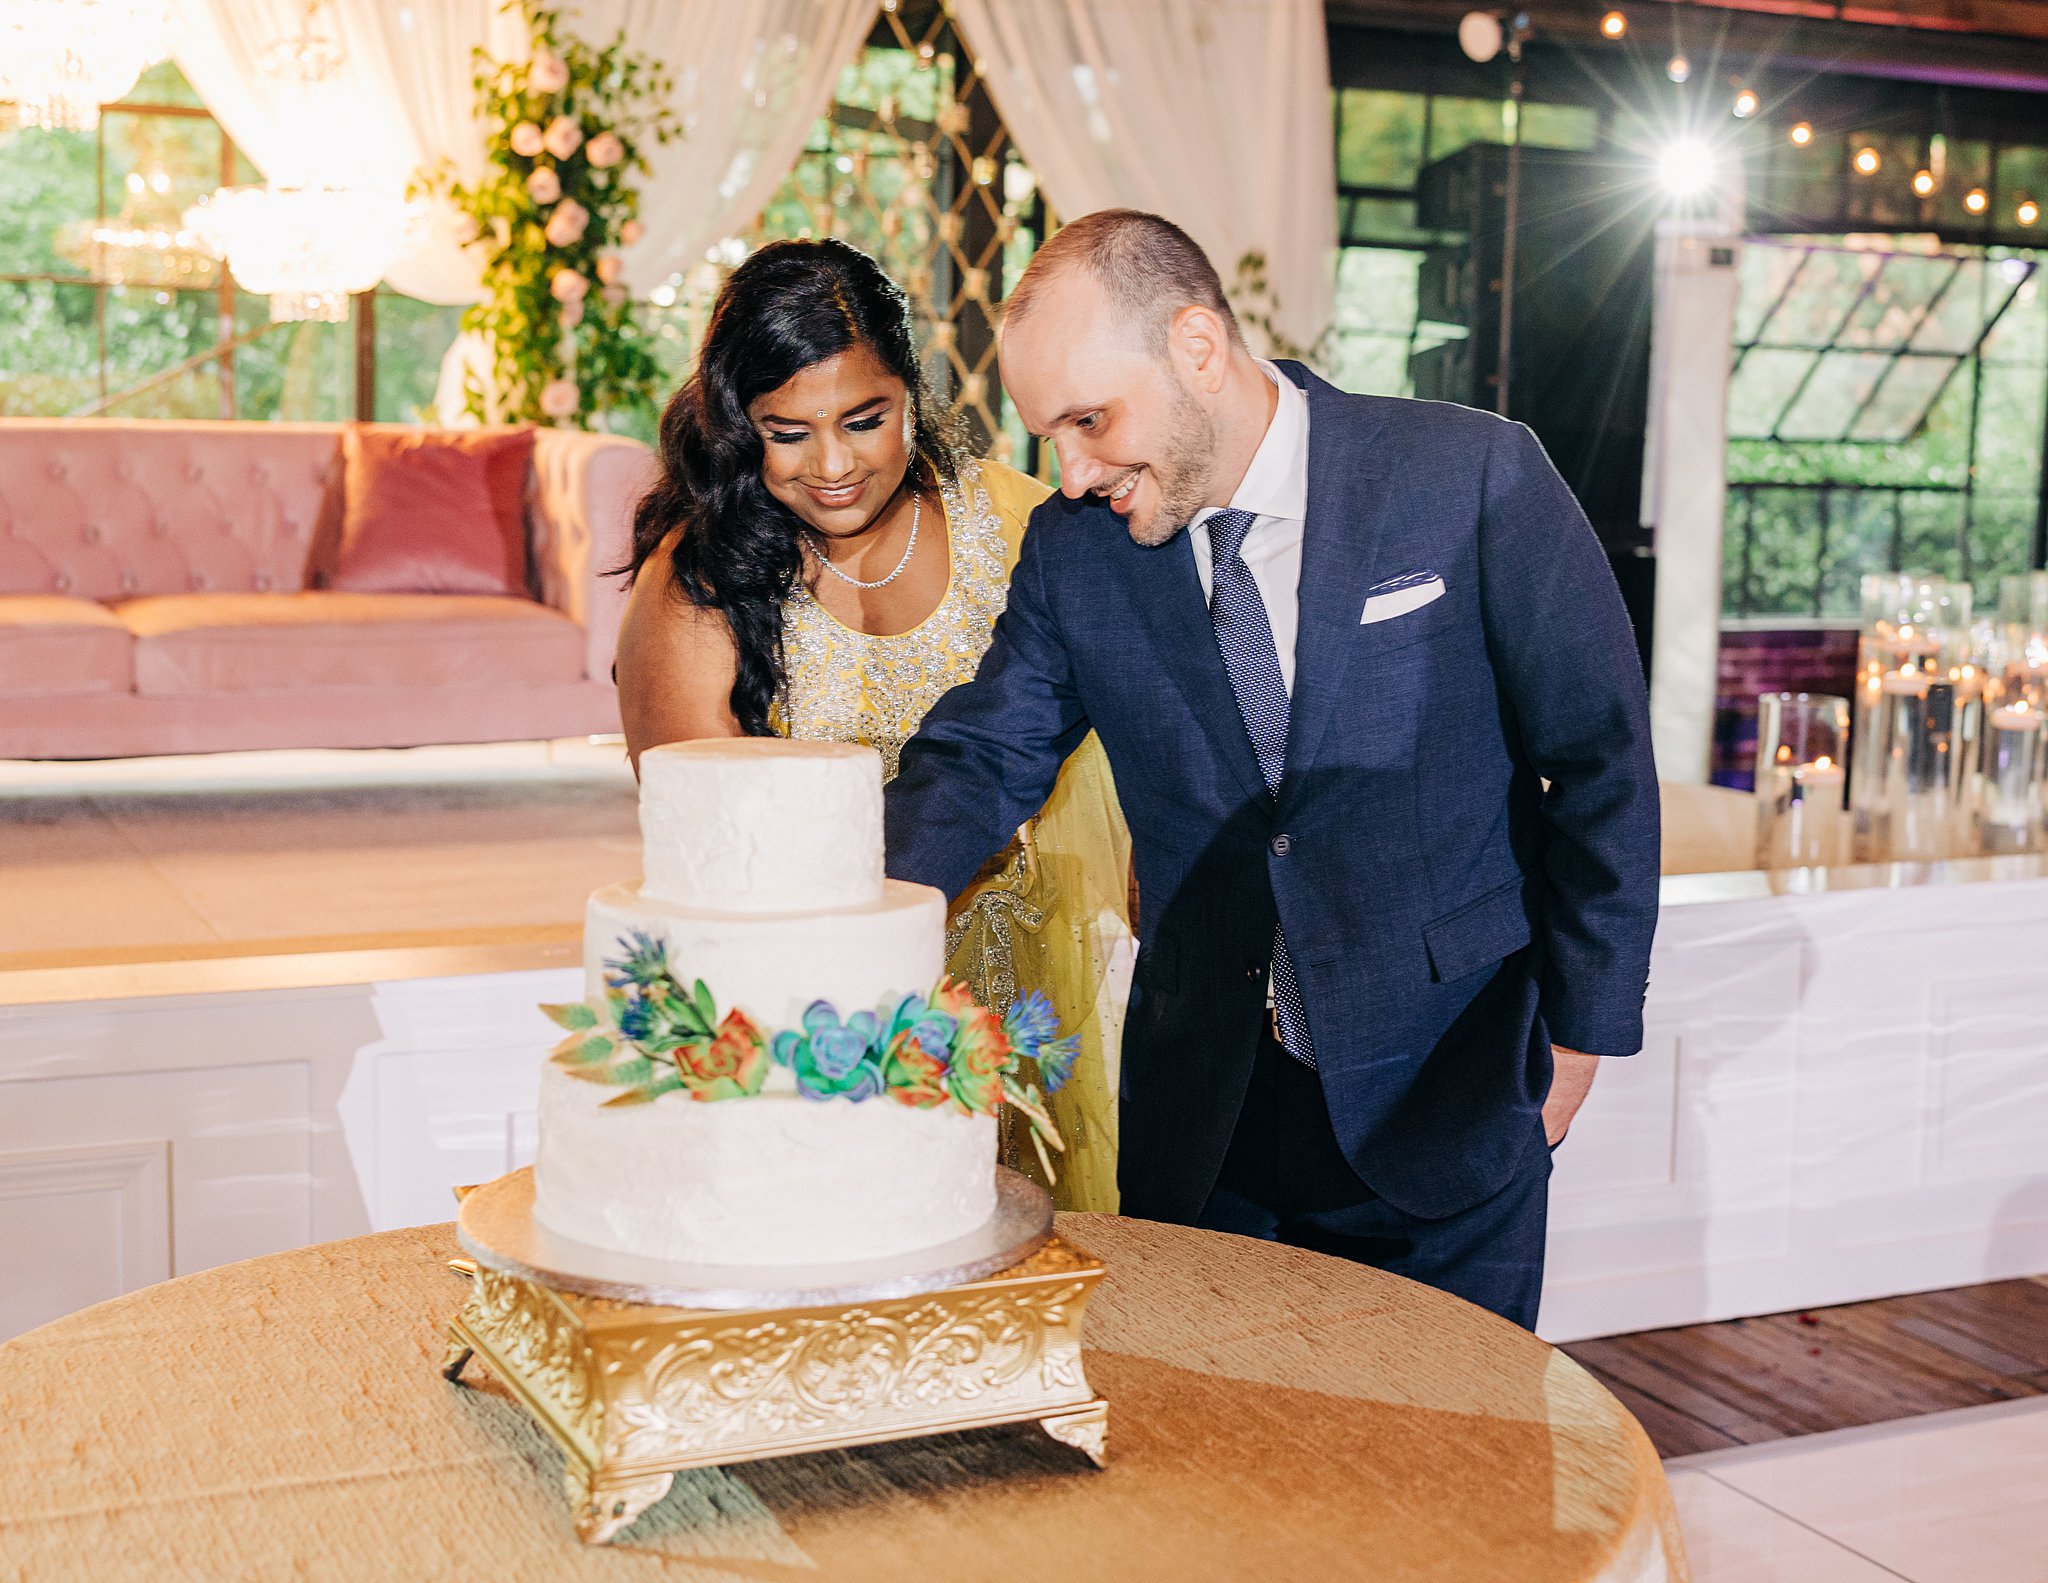 Newlyweds cut their white three-tier cake with colorful flowers in a blue suit and yellow traditional dress